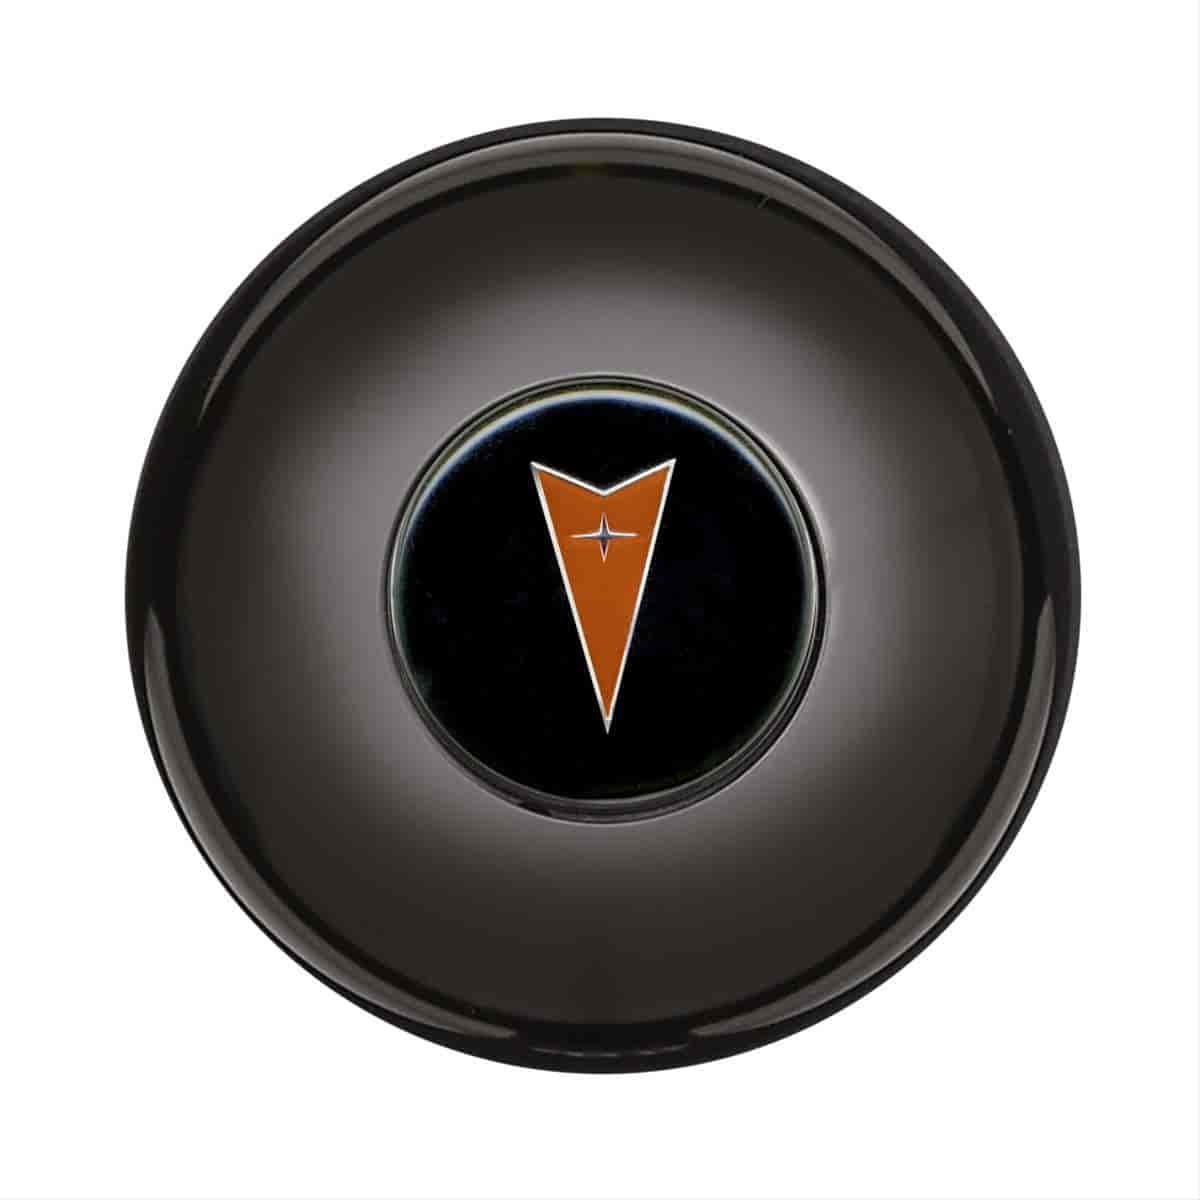 GT3 Gasser/Euro Style Horn Button Pontiac Logo Colored Smooth Style Black Anodized